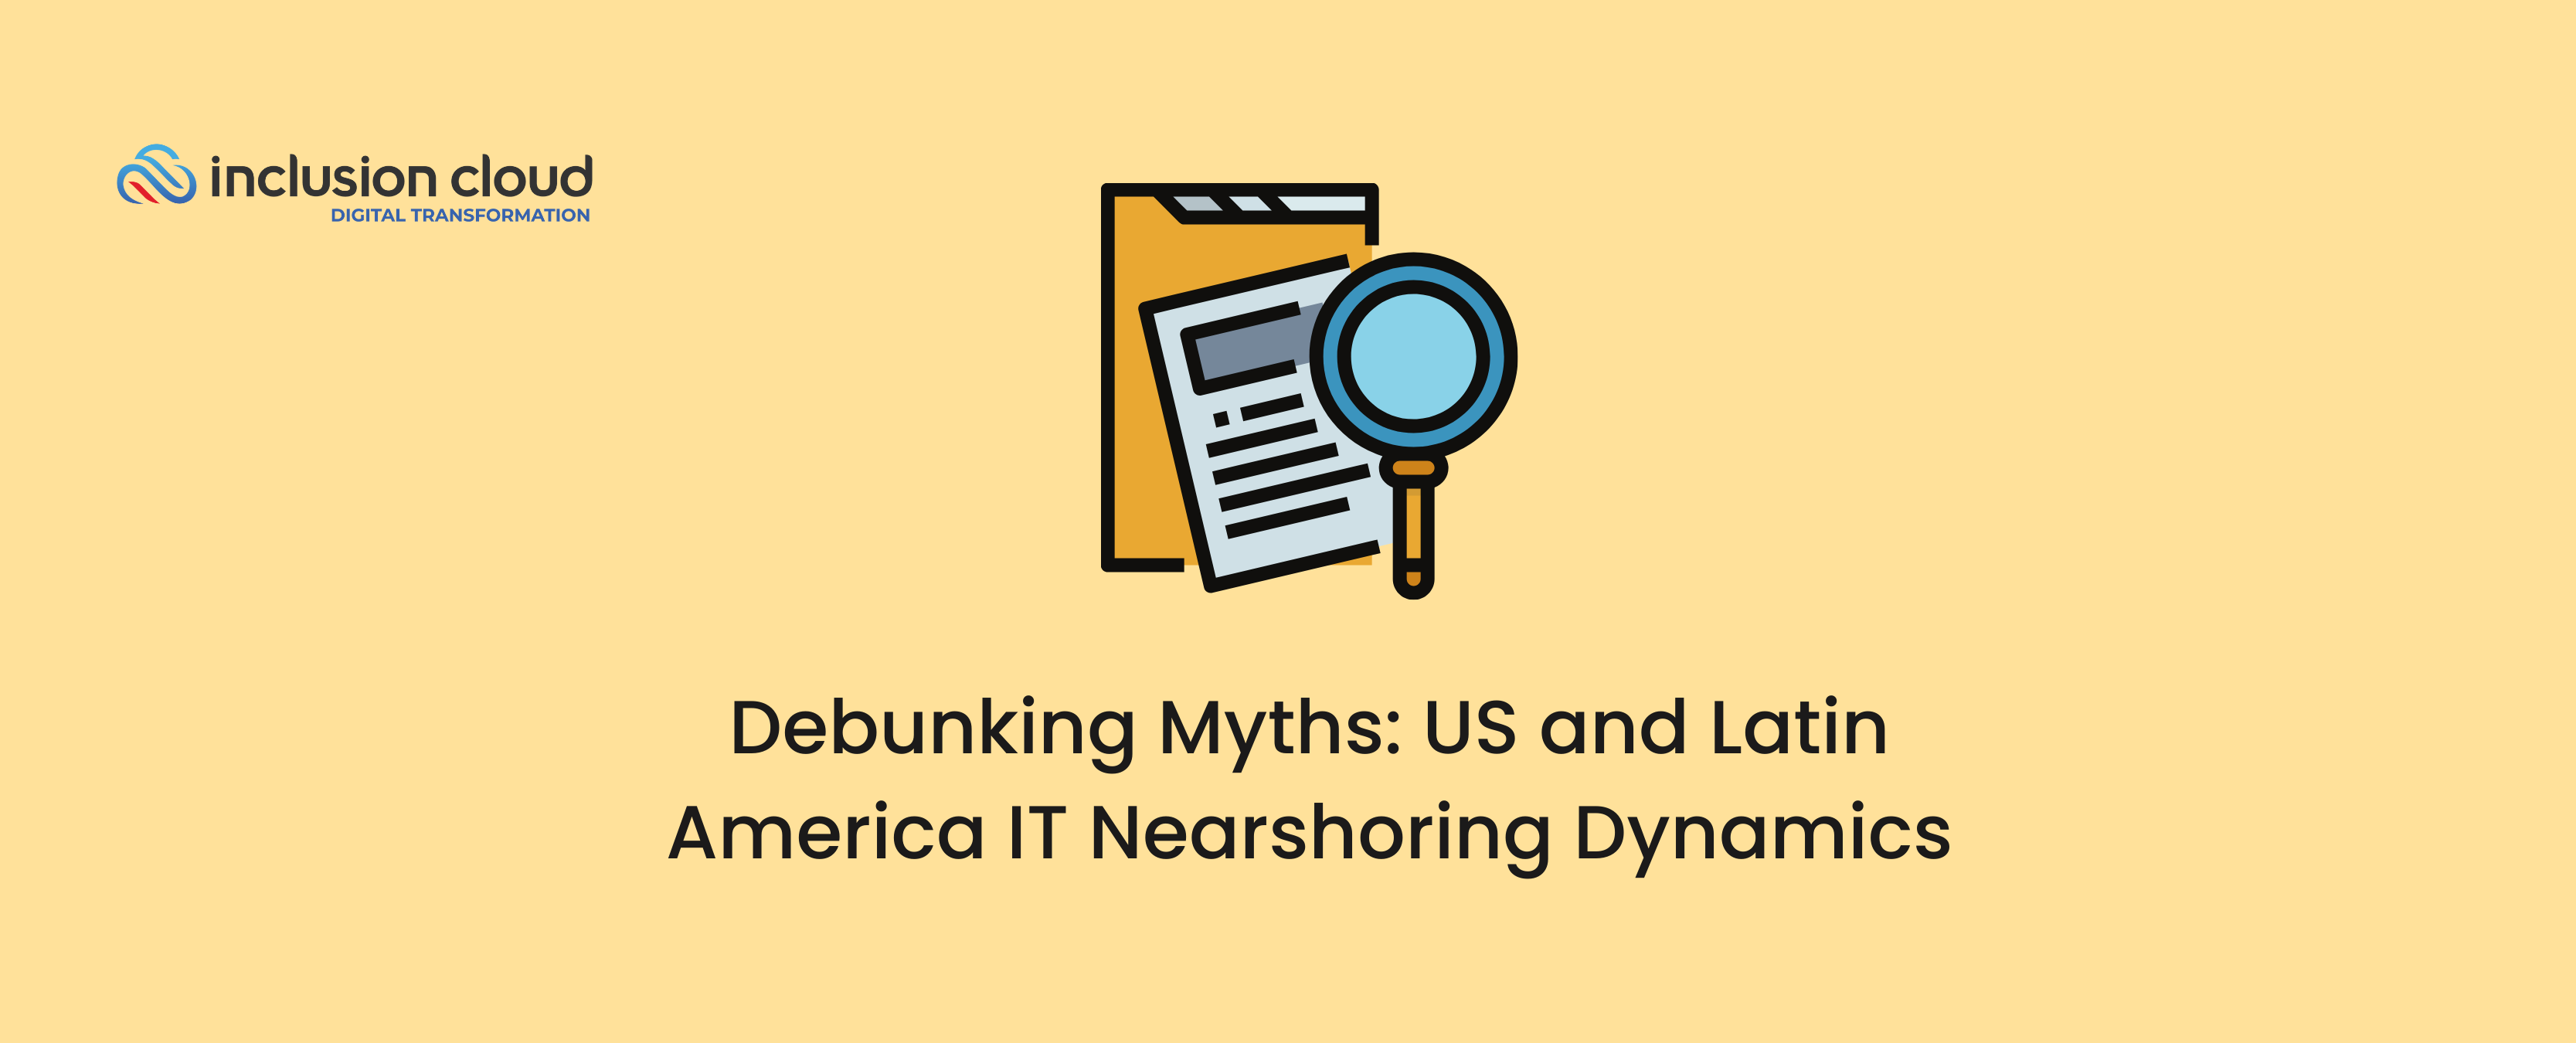 Debunking Myths Nearshoring IT Talent in Latin America with US Management